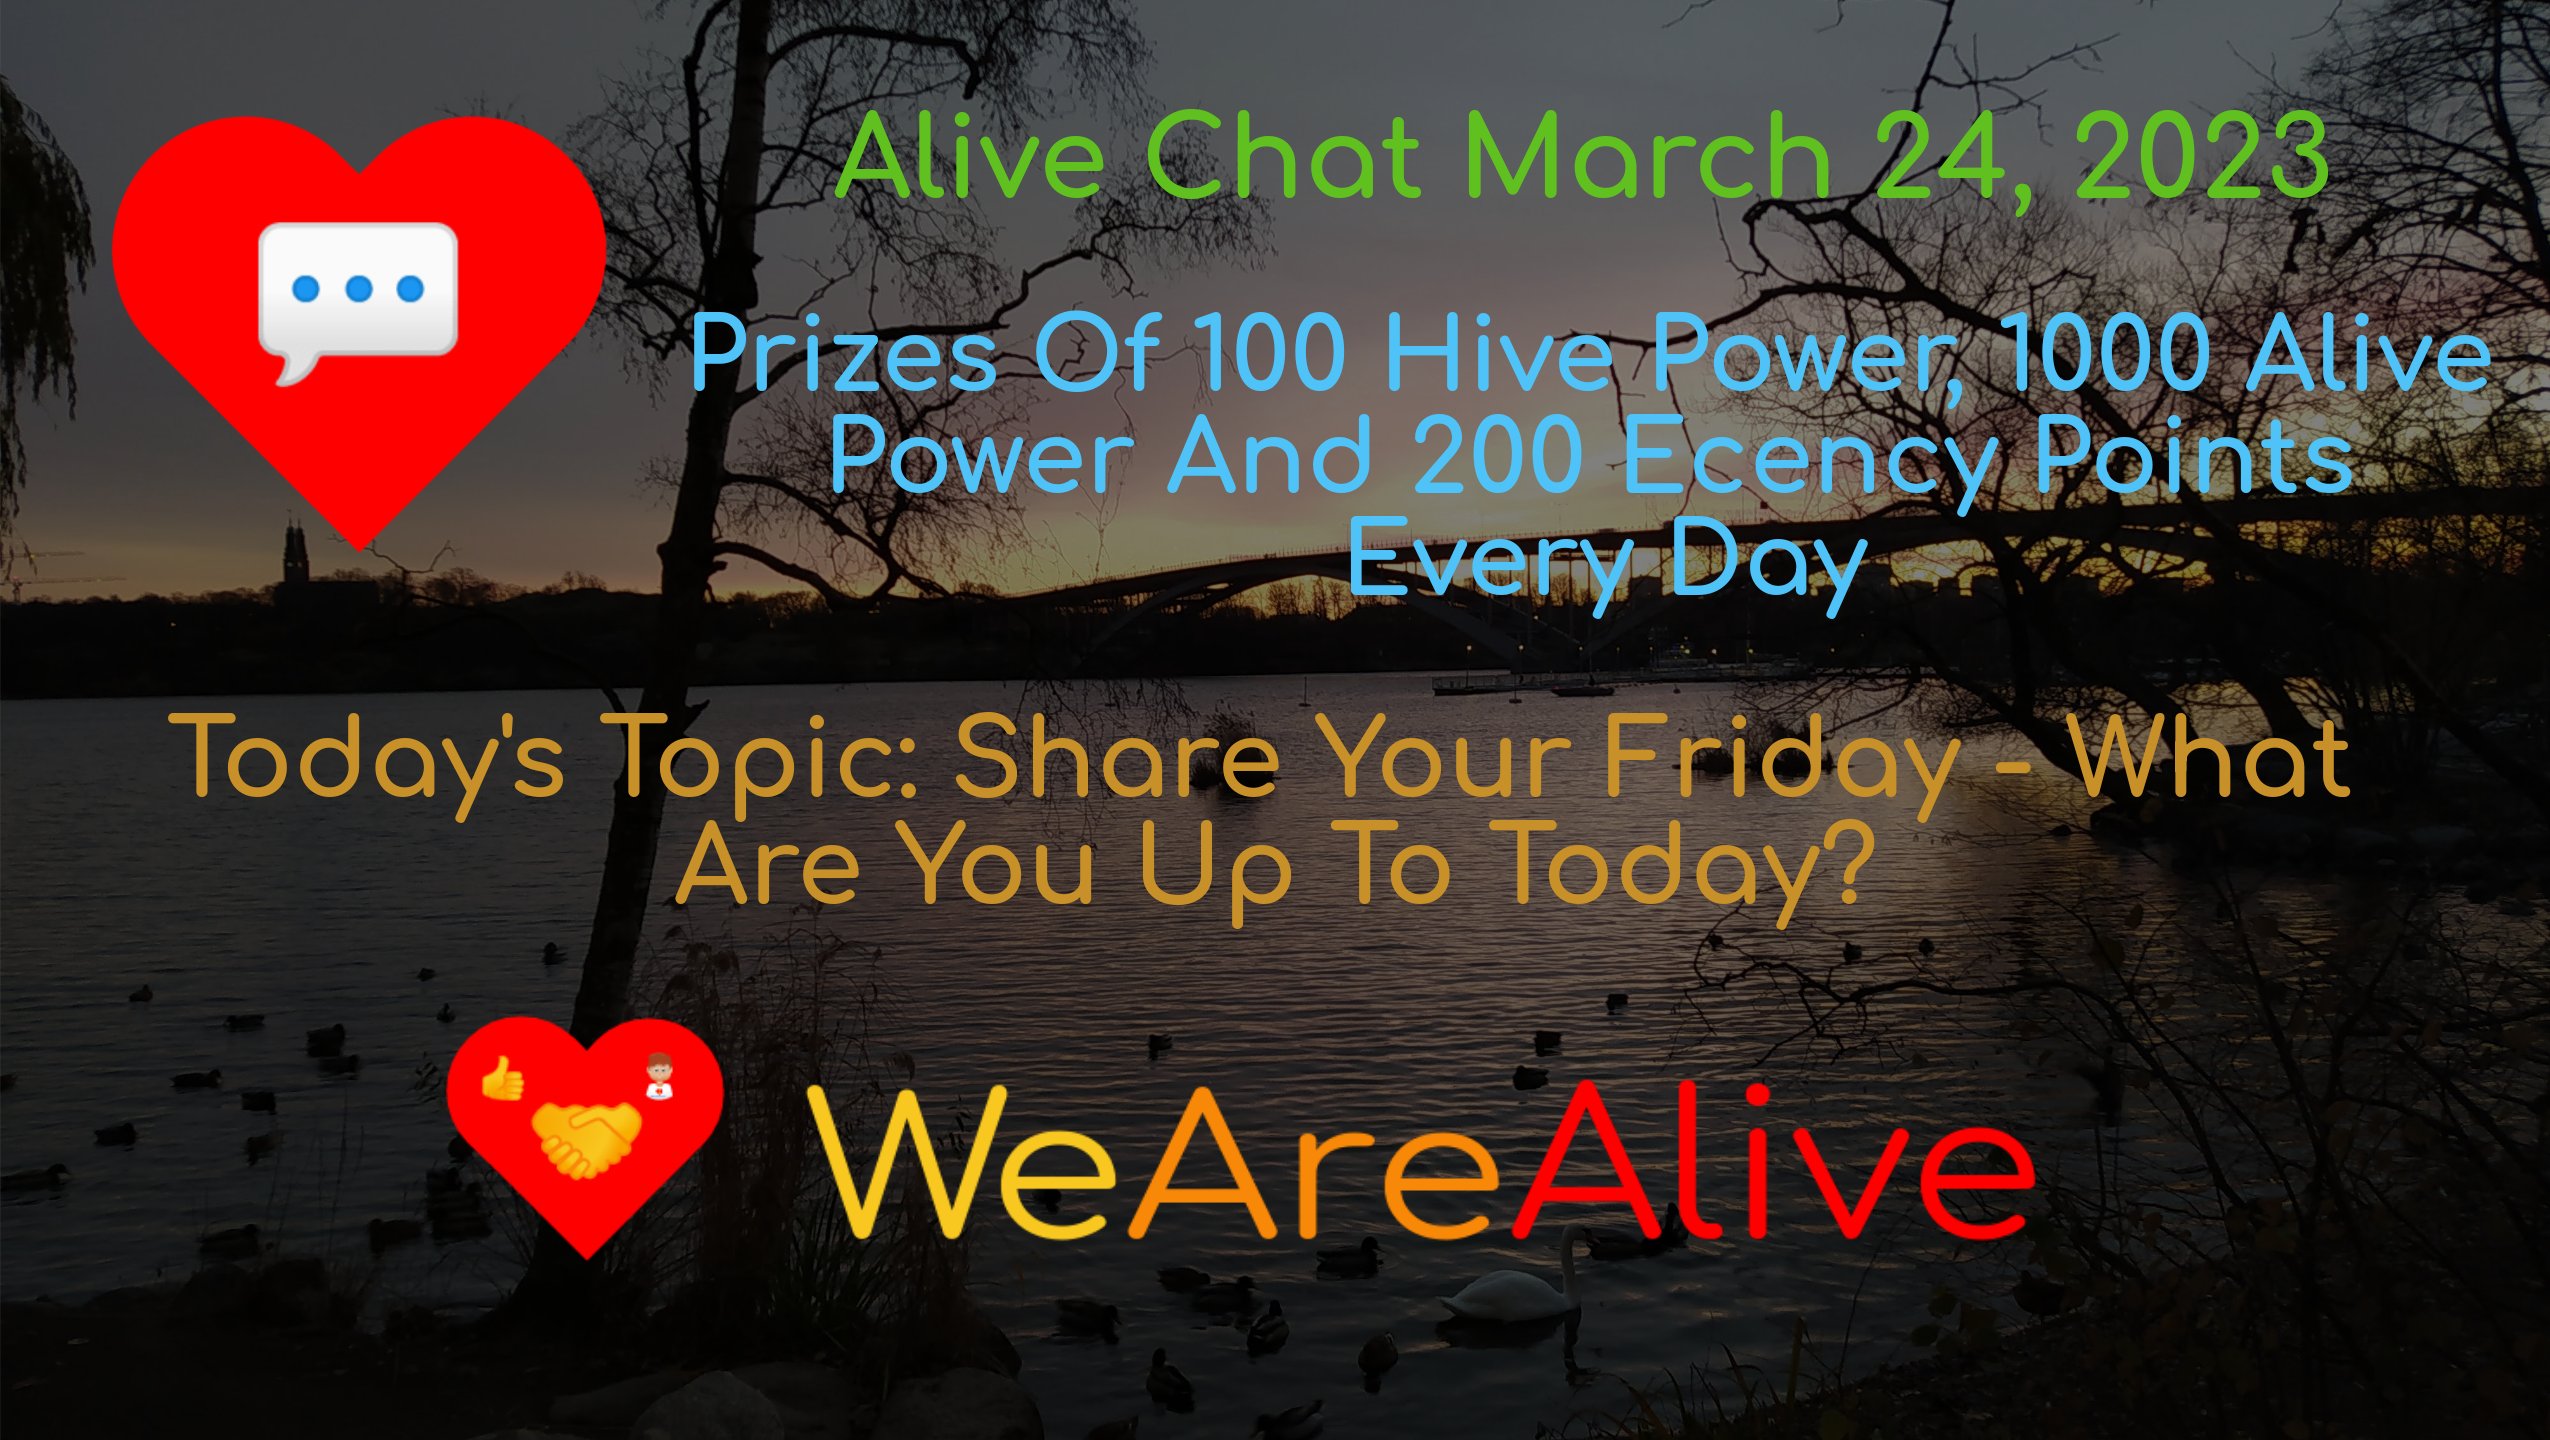 @alive.chat/alive-chat-march-24-2023